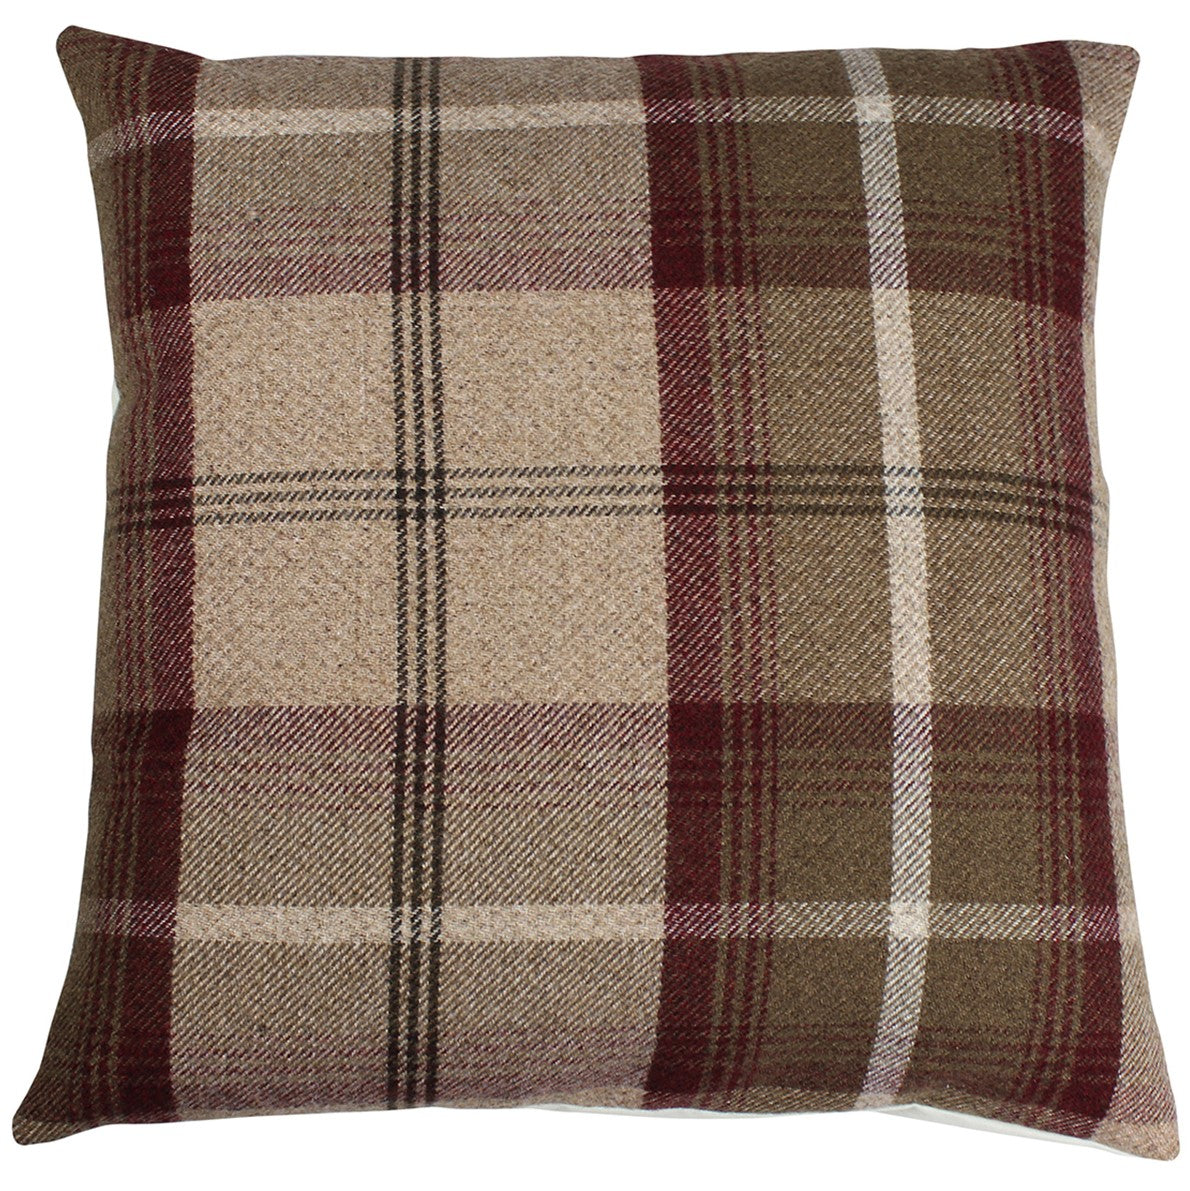 Mulberry Balmoral Checked Cushion